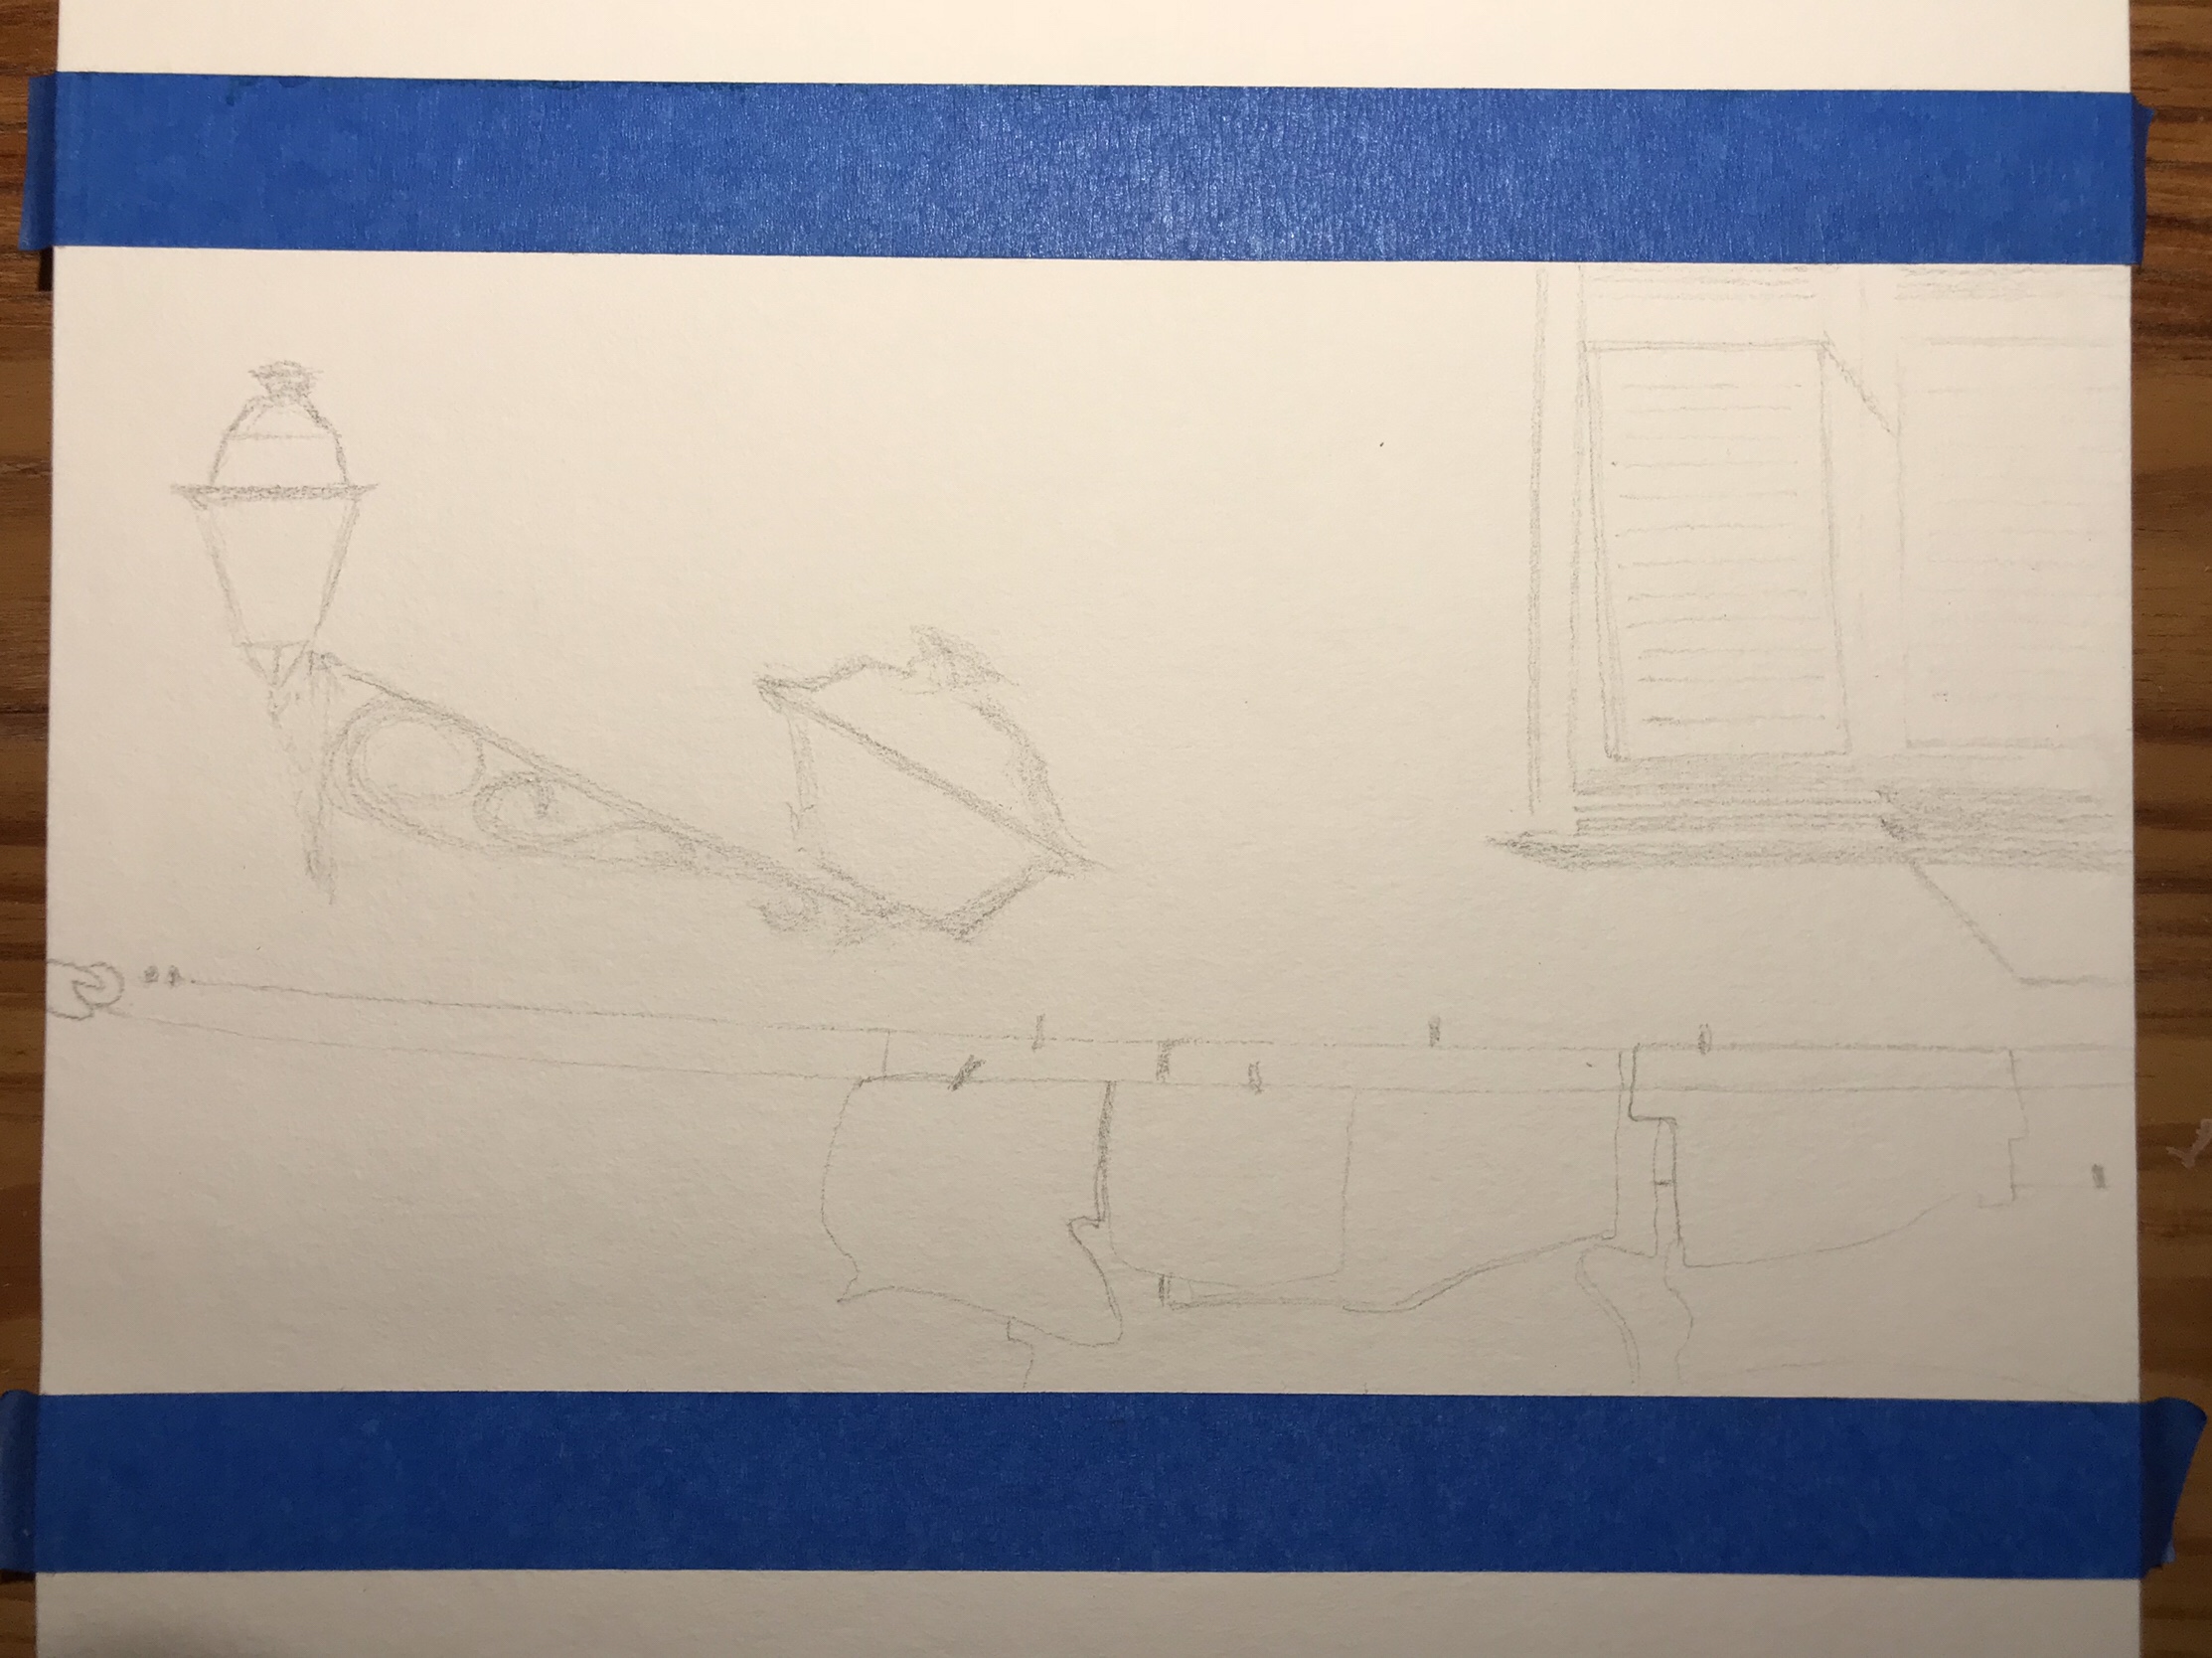 Masking tape and pencil sketch on a large watercolor pad: street lamp and its shadow on the wall it is mounted on, clothesline and clothes, window blinds.